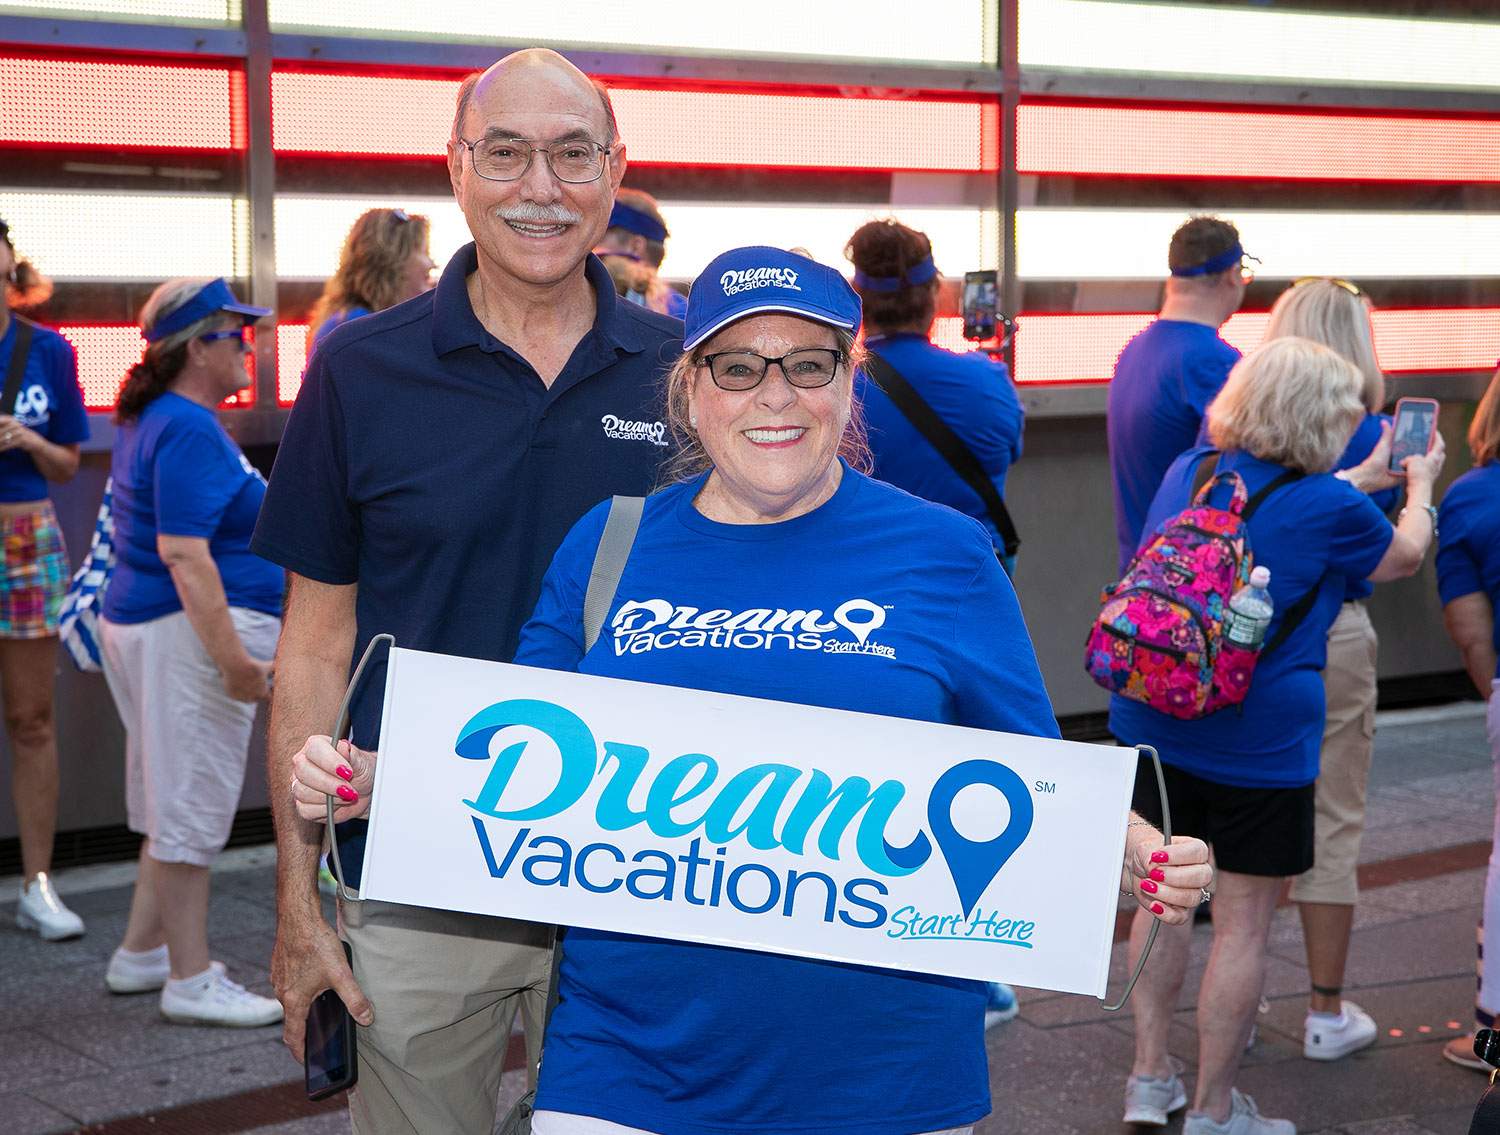 Dream Vacations Planner holding a sign